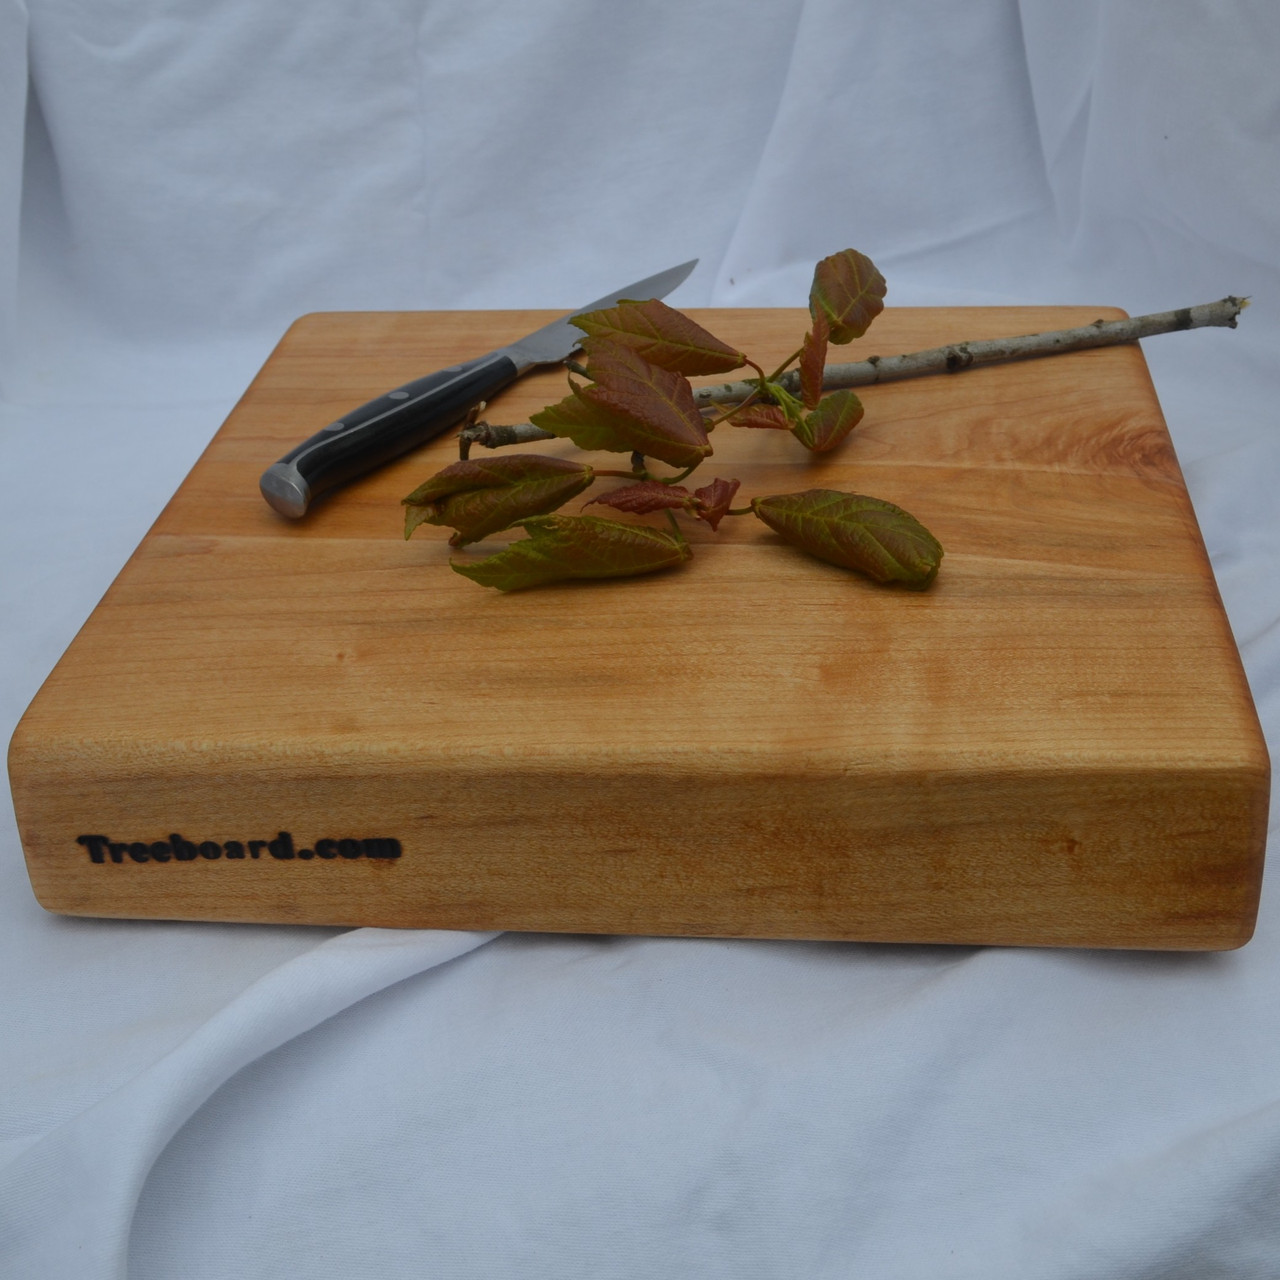 https://cdn11.bigcommerce.com/s-1vey7r6116/images/stencil/1280x1280/products/112/408/hard-maple-solid-cutting-board-by-Treeboard-medium-leaves-knife__72797.1669344747.jpg?c=1